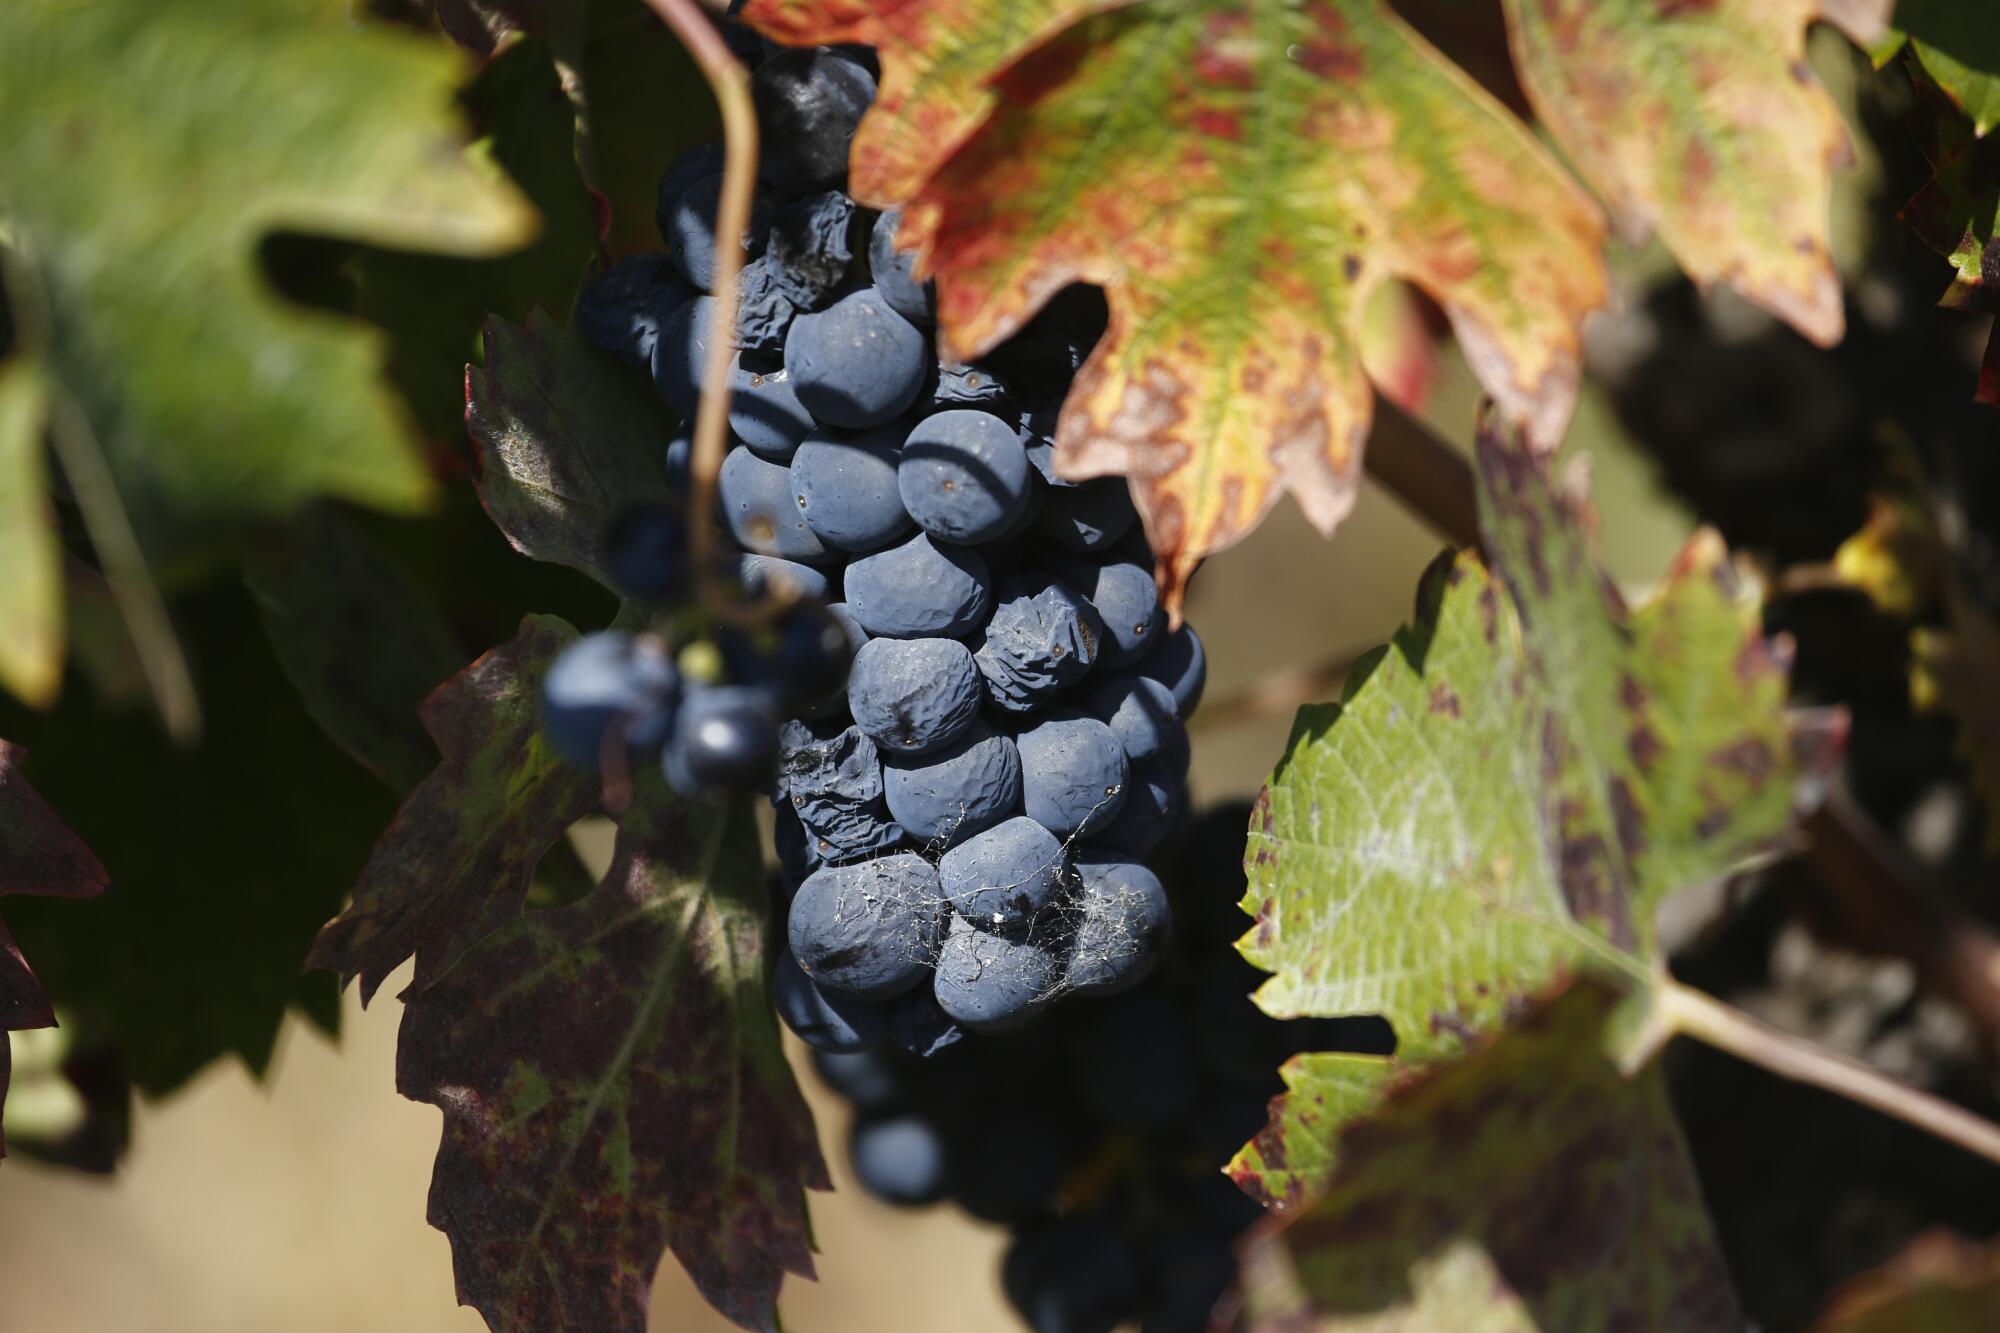 Wine grapes in the Russian River Valley of Sonoma County. Some winemakers fear that much of the wine in the process of being fermented and aged is ruined by the Kincade fire.